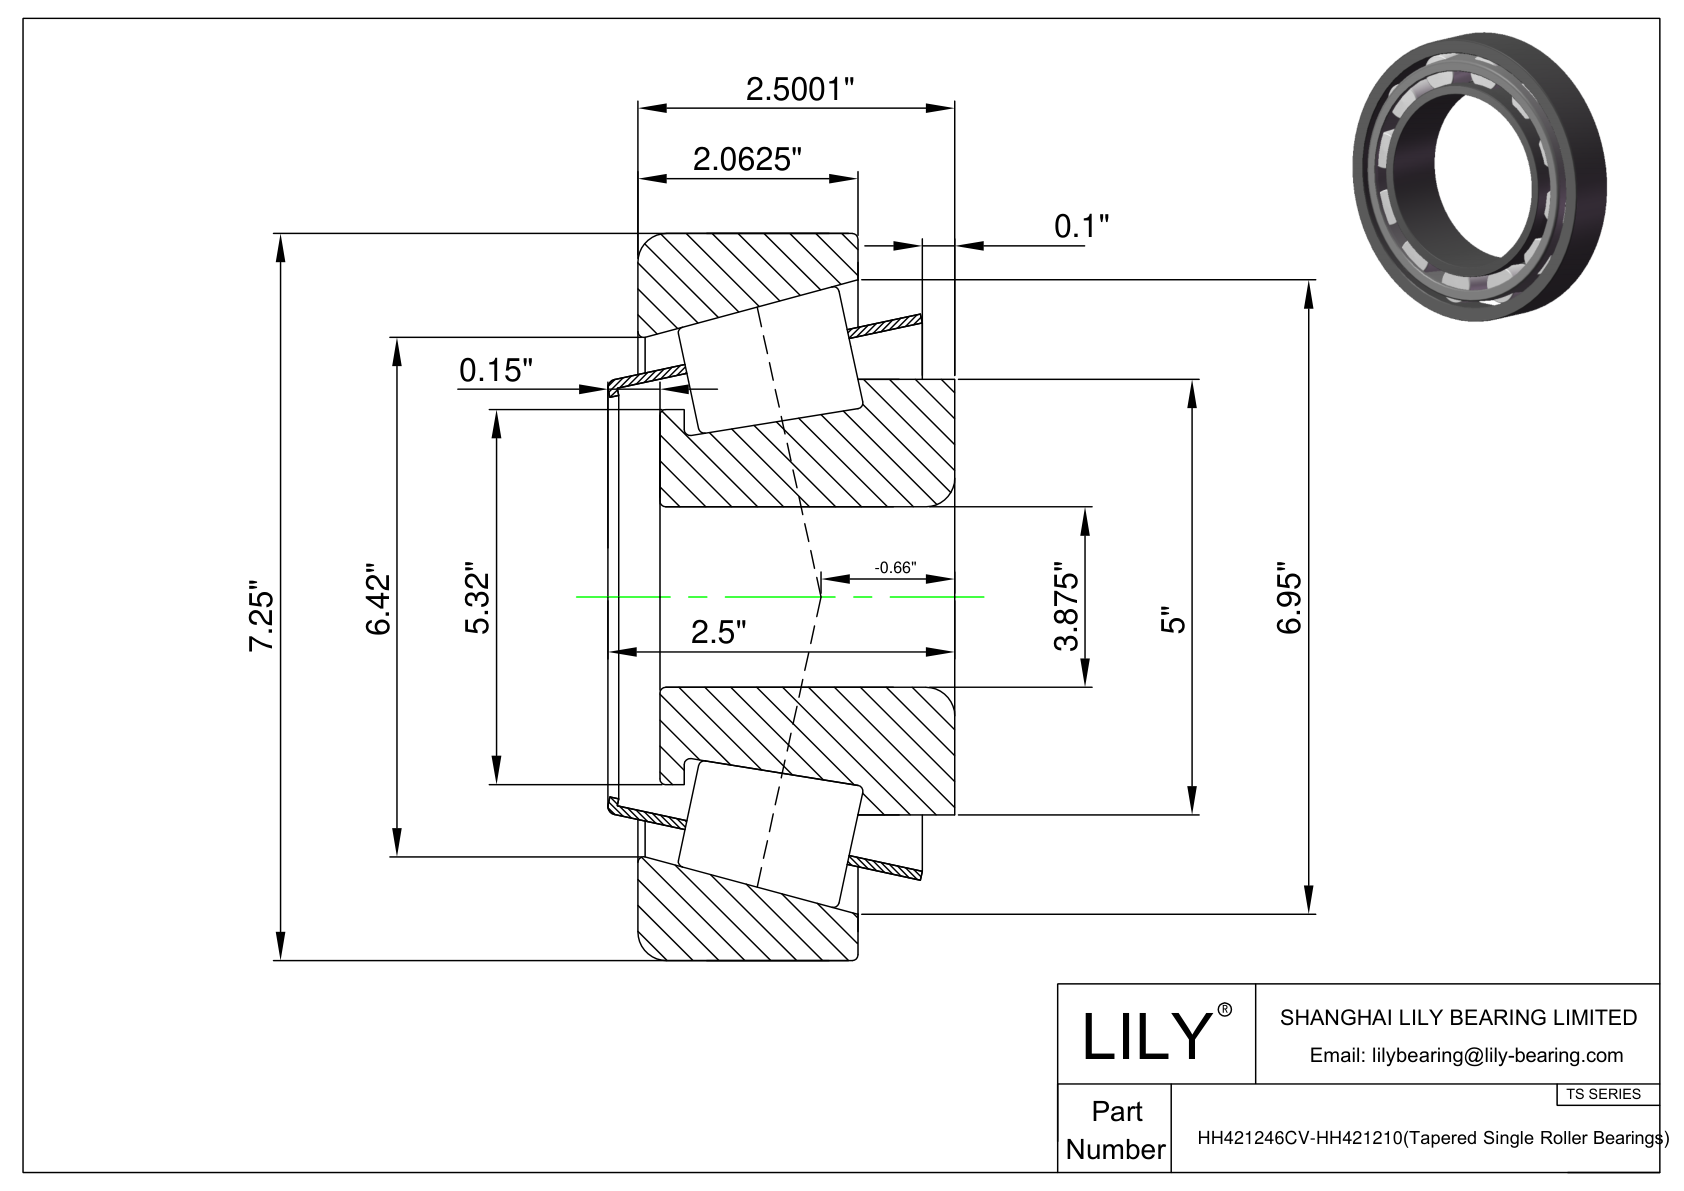 HH421246CV-HH421210 TS (Tapered Single Roller Bearings) (Imperial) cad drawing